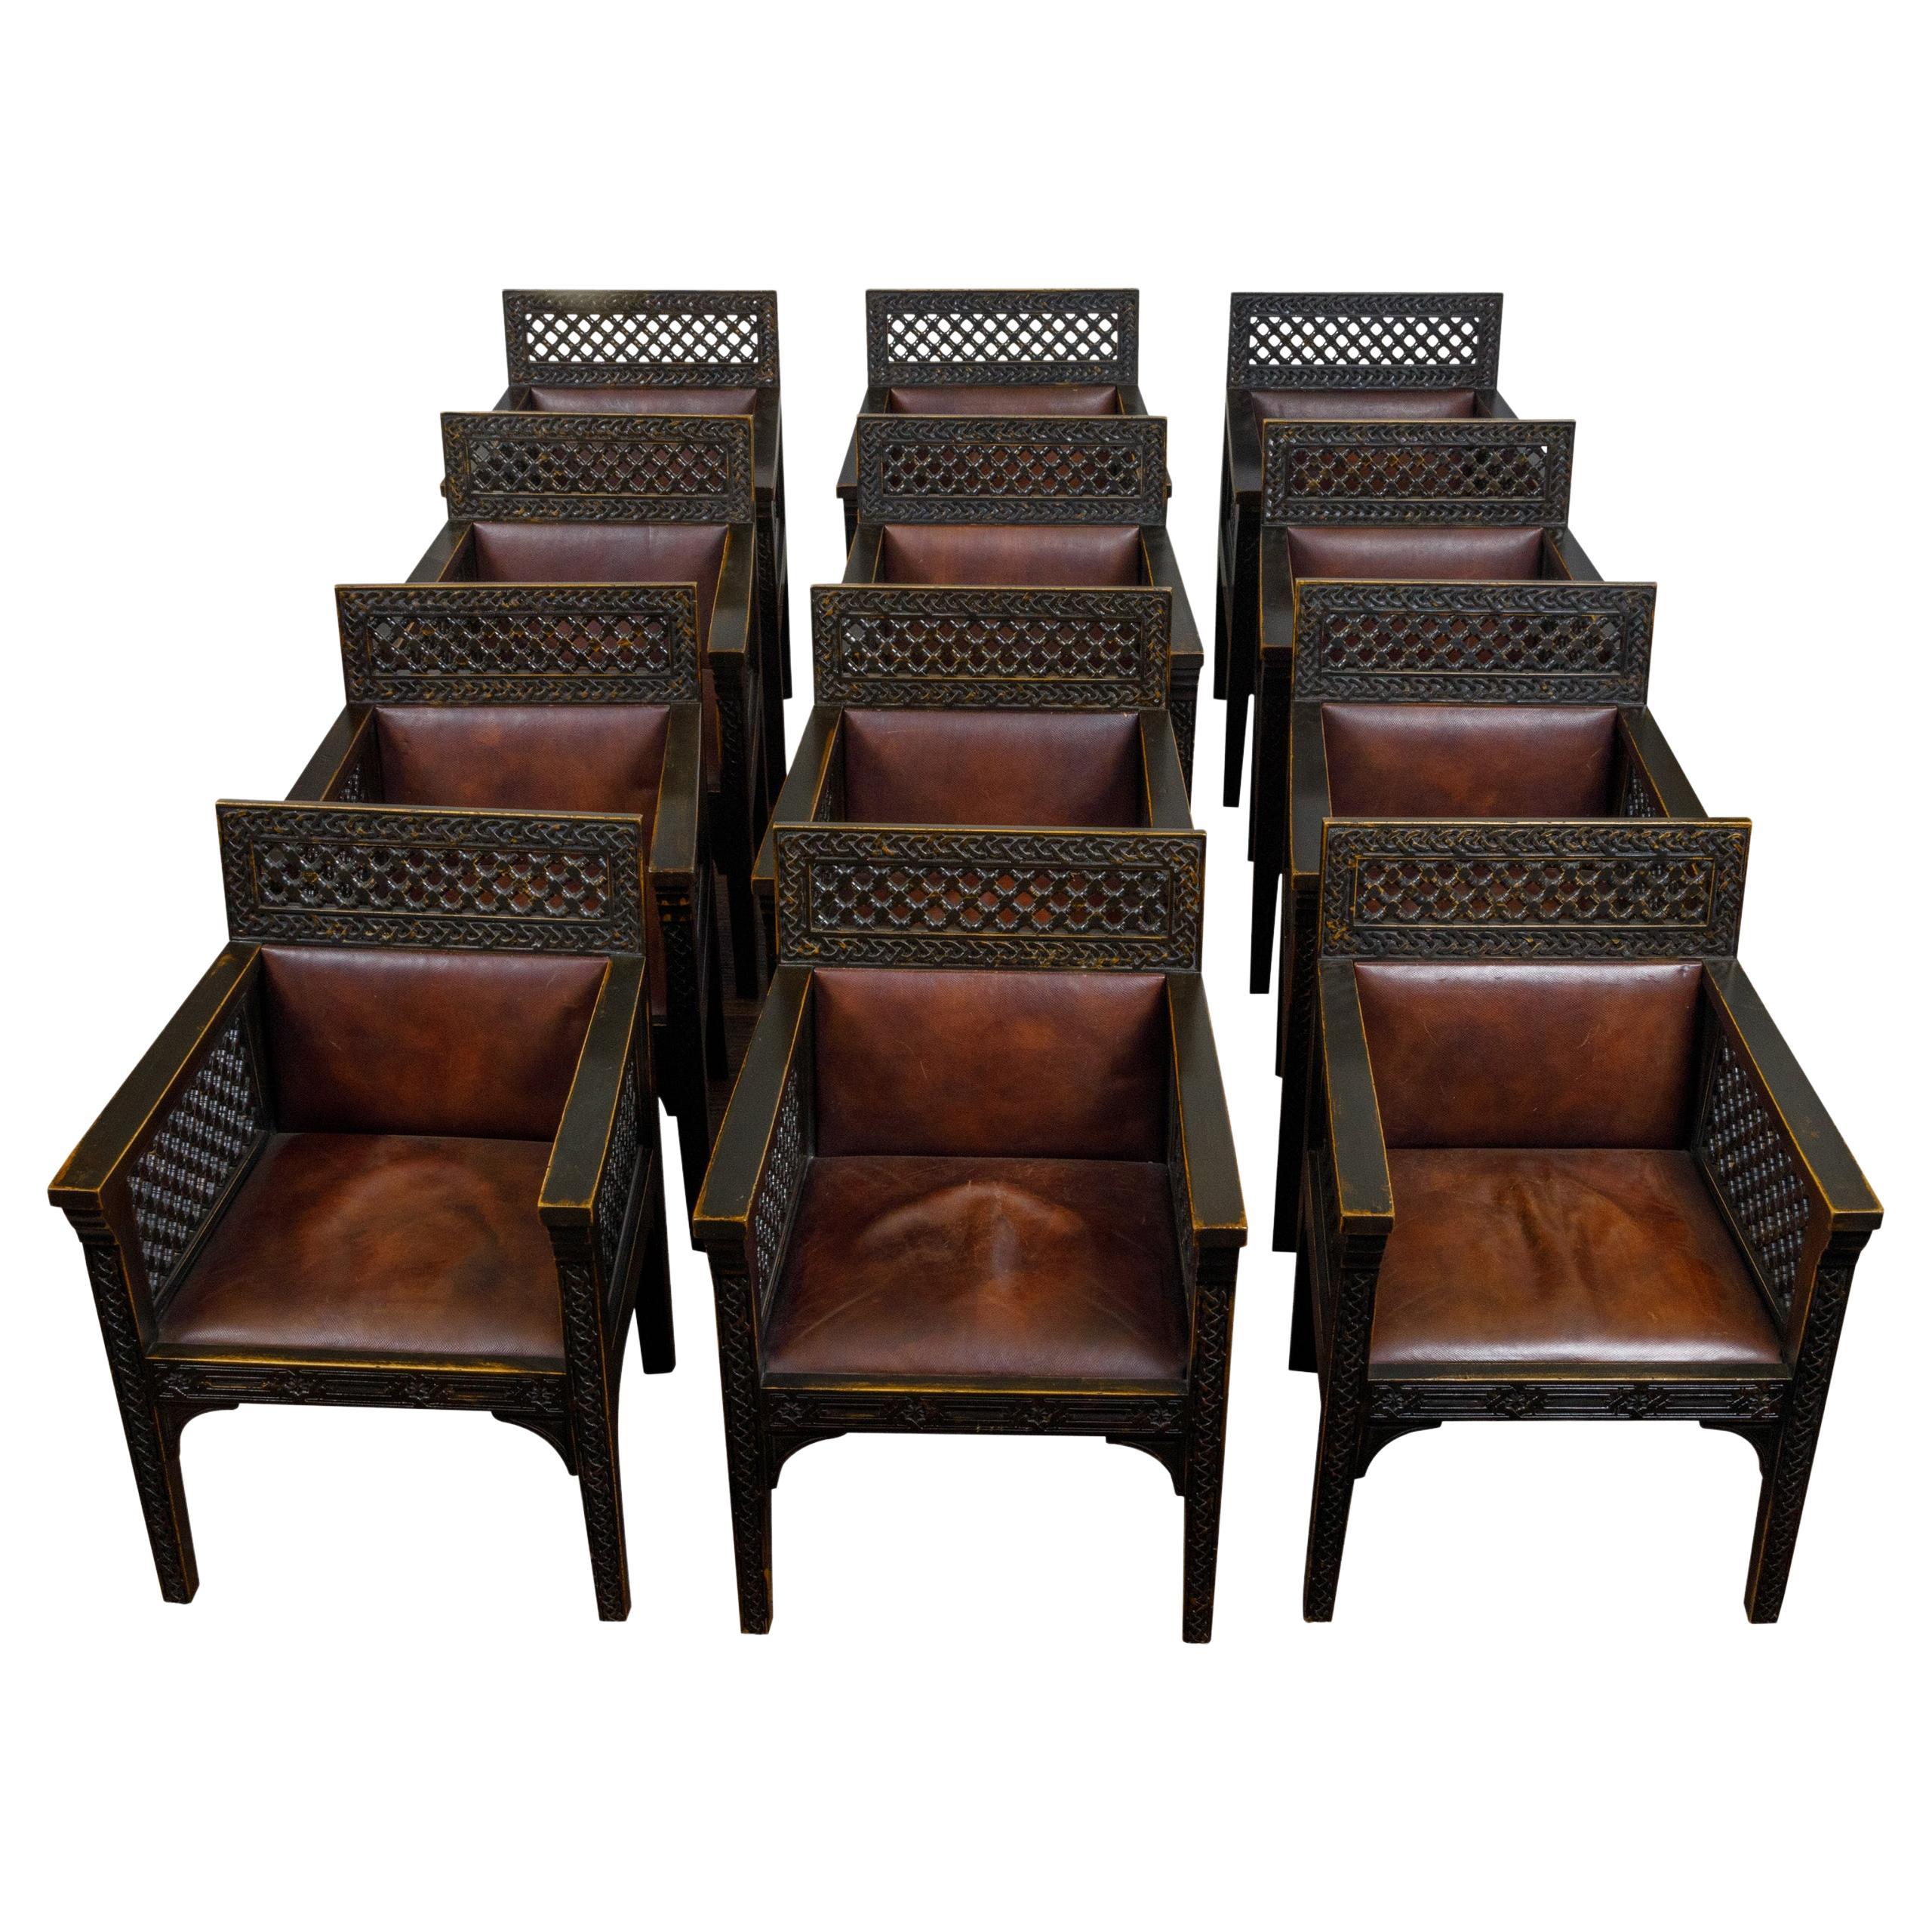 Set of 12 Moroccan Ebonized Carved Wood Armchairs with Leather Seats, circa 1900 For Sale